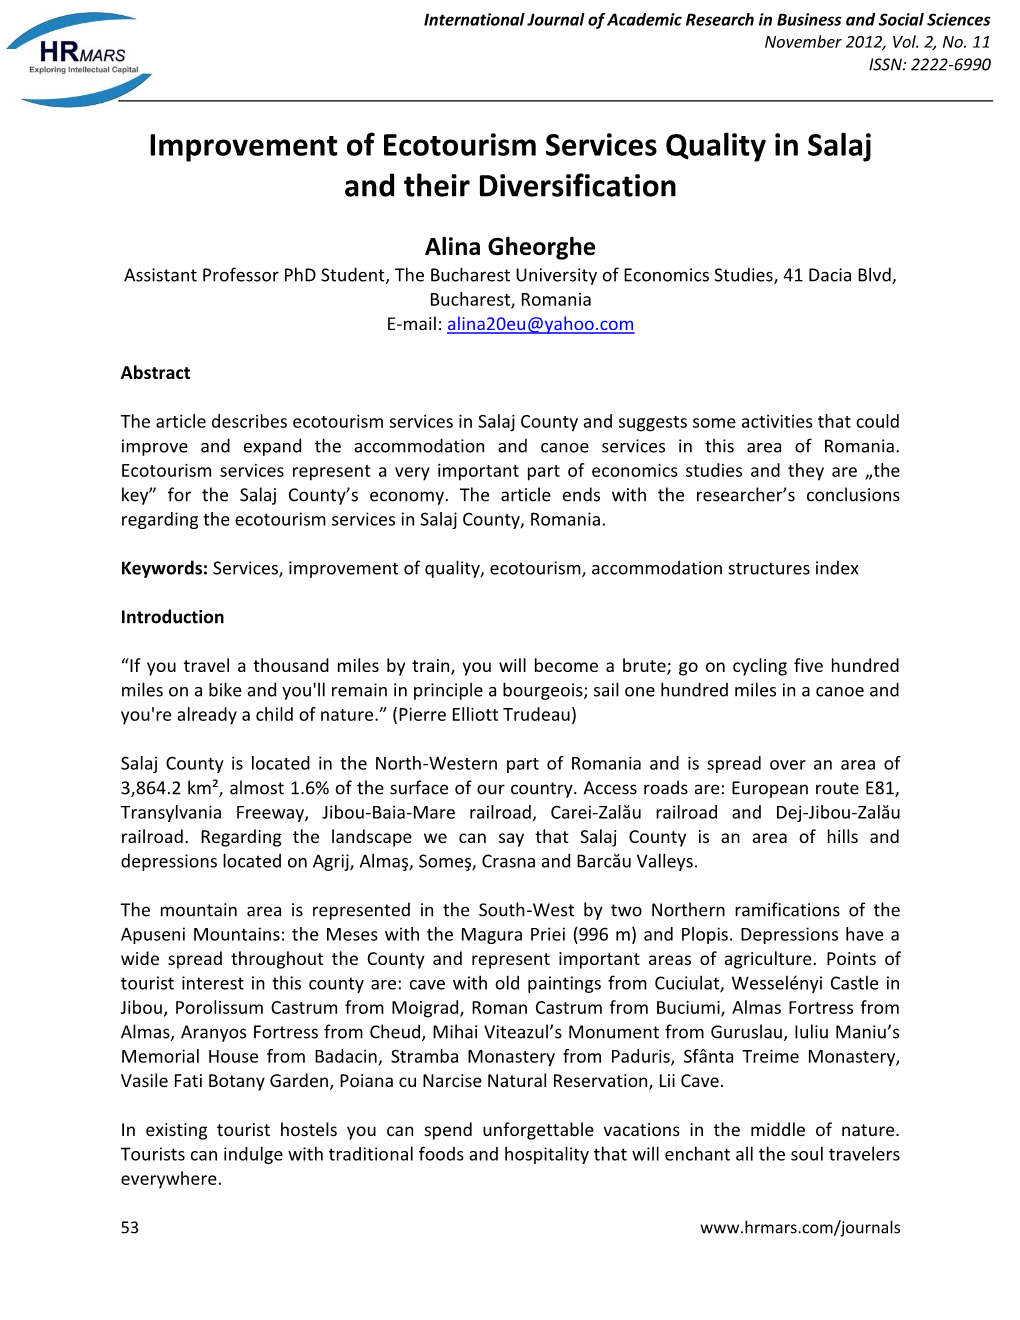 Improvement of Ecotourism Services Quality in Salaj and Their Diversification